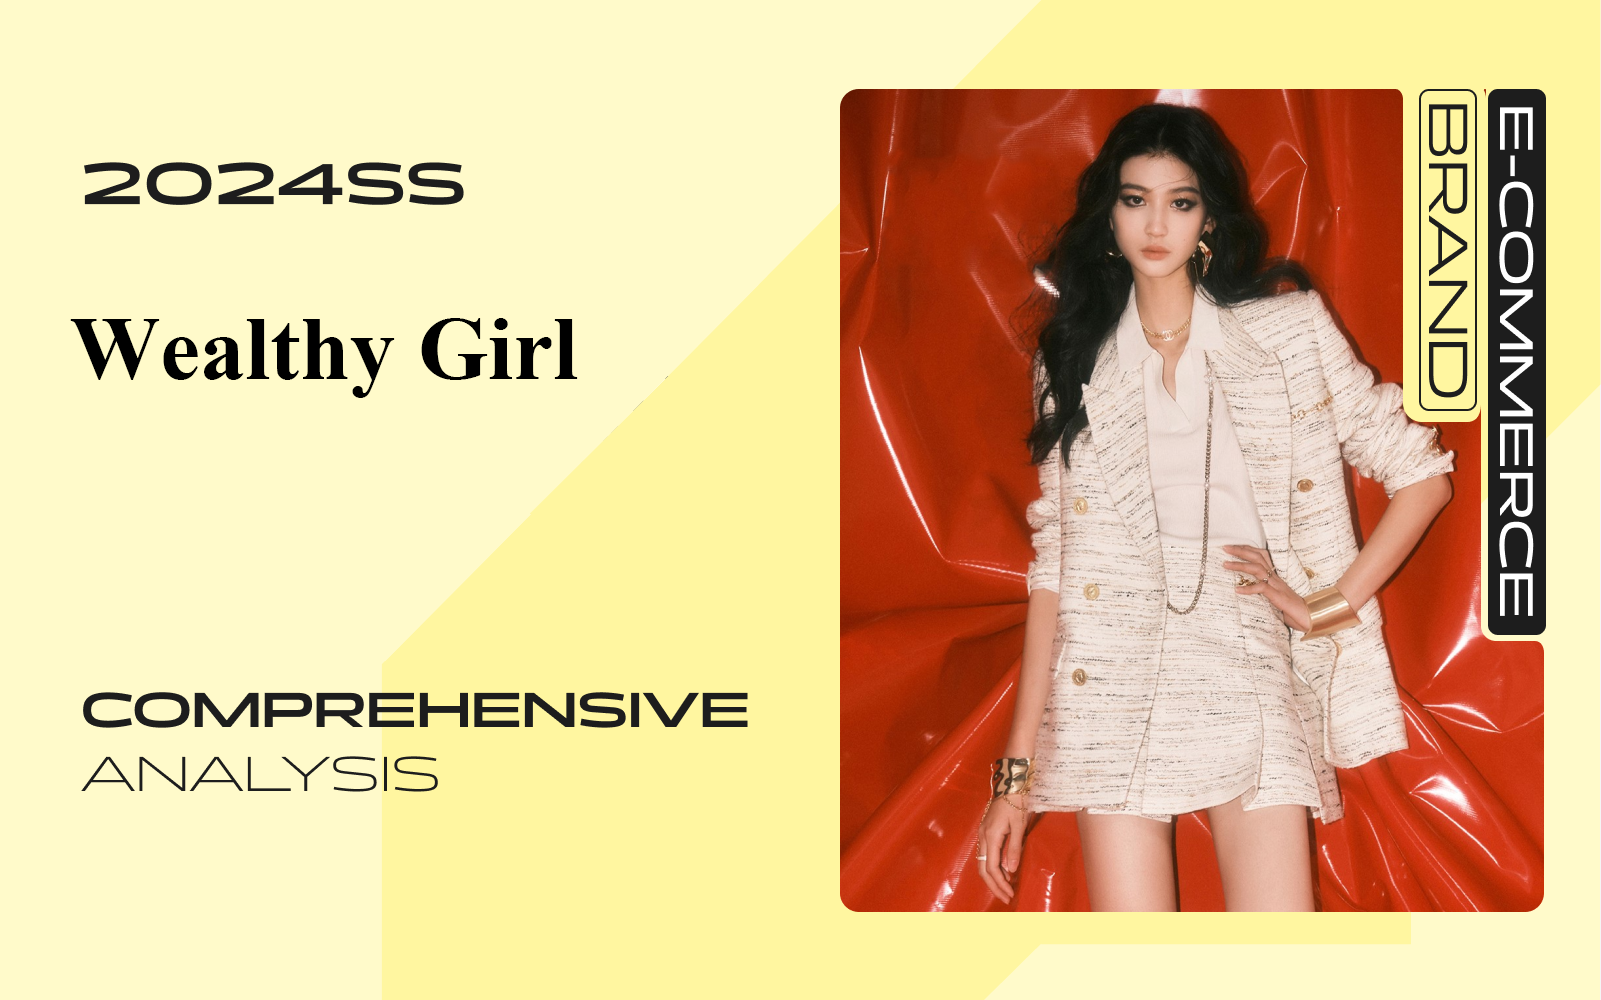 Wealthy Girl -- The Popular Style of E-Commerce Womenswear Brand